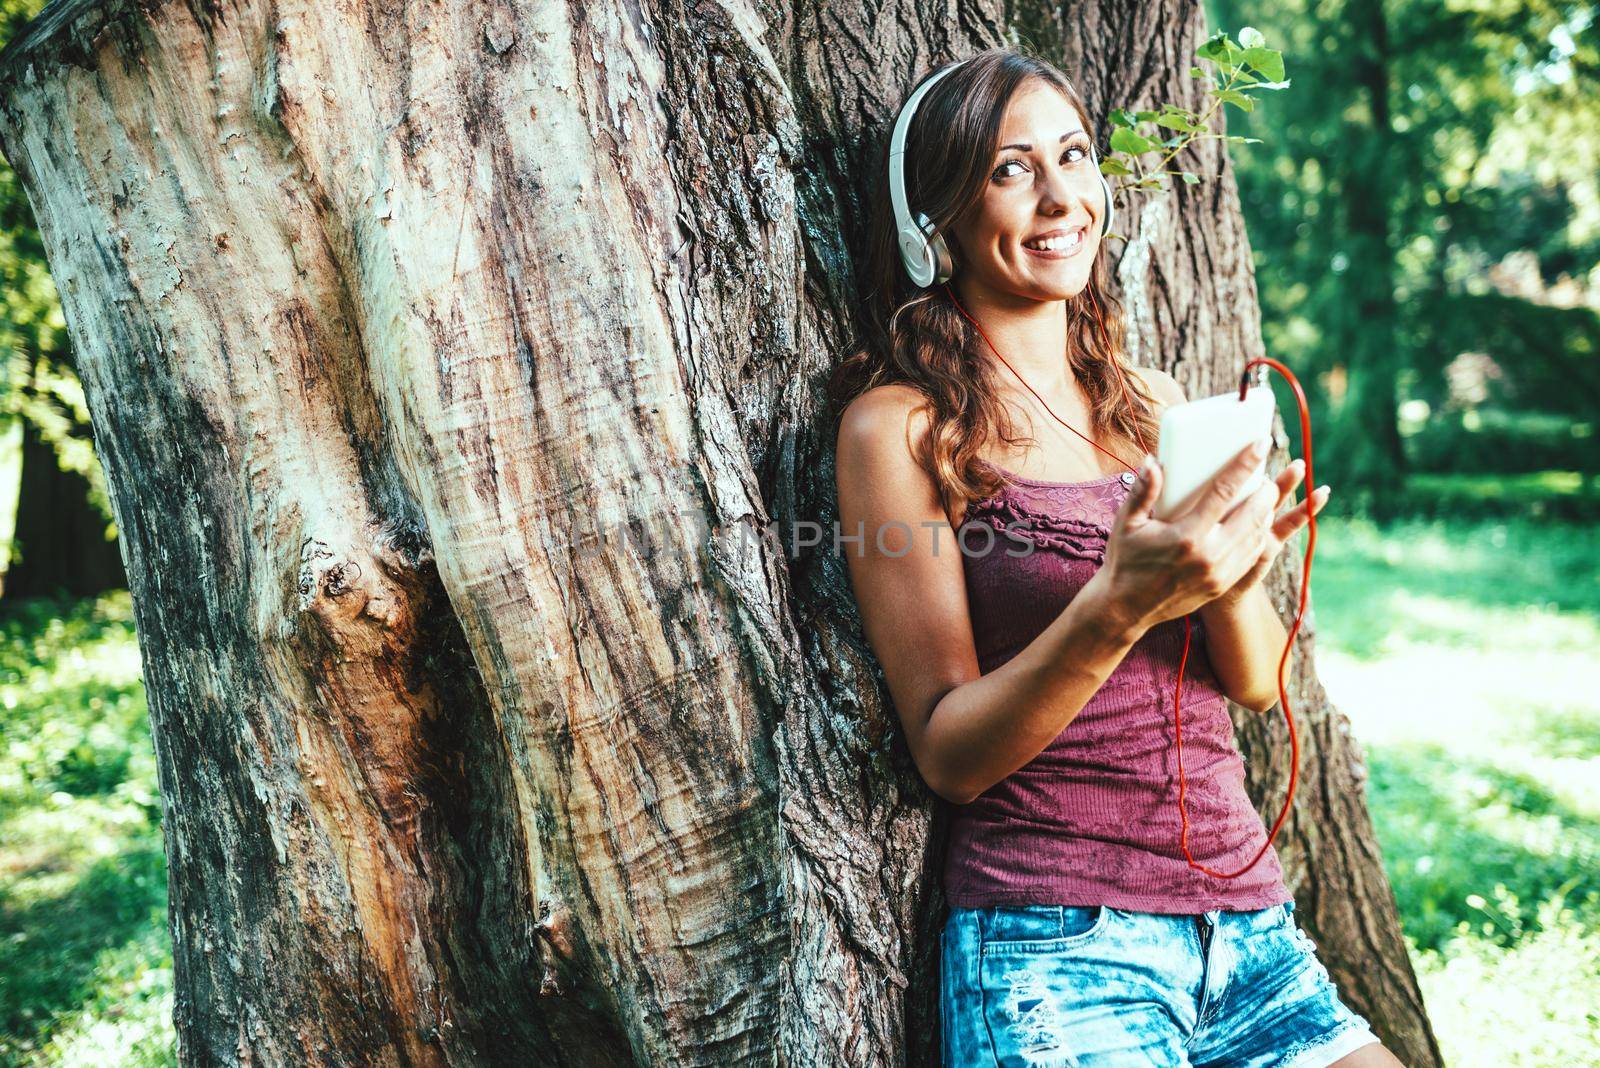 Smiling beautiful modern woman listening to music with phone standing under a tree in a city park 